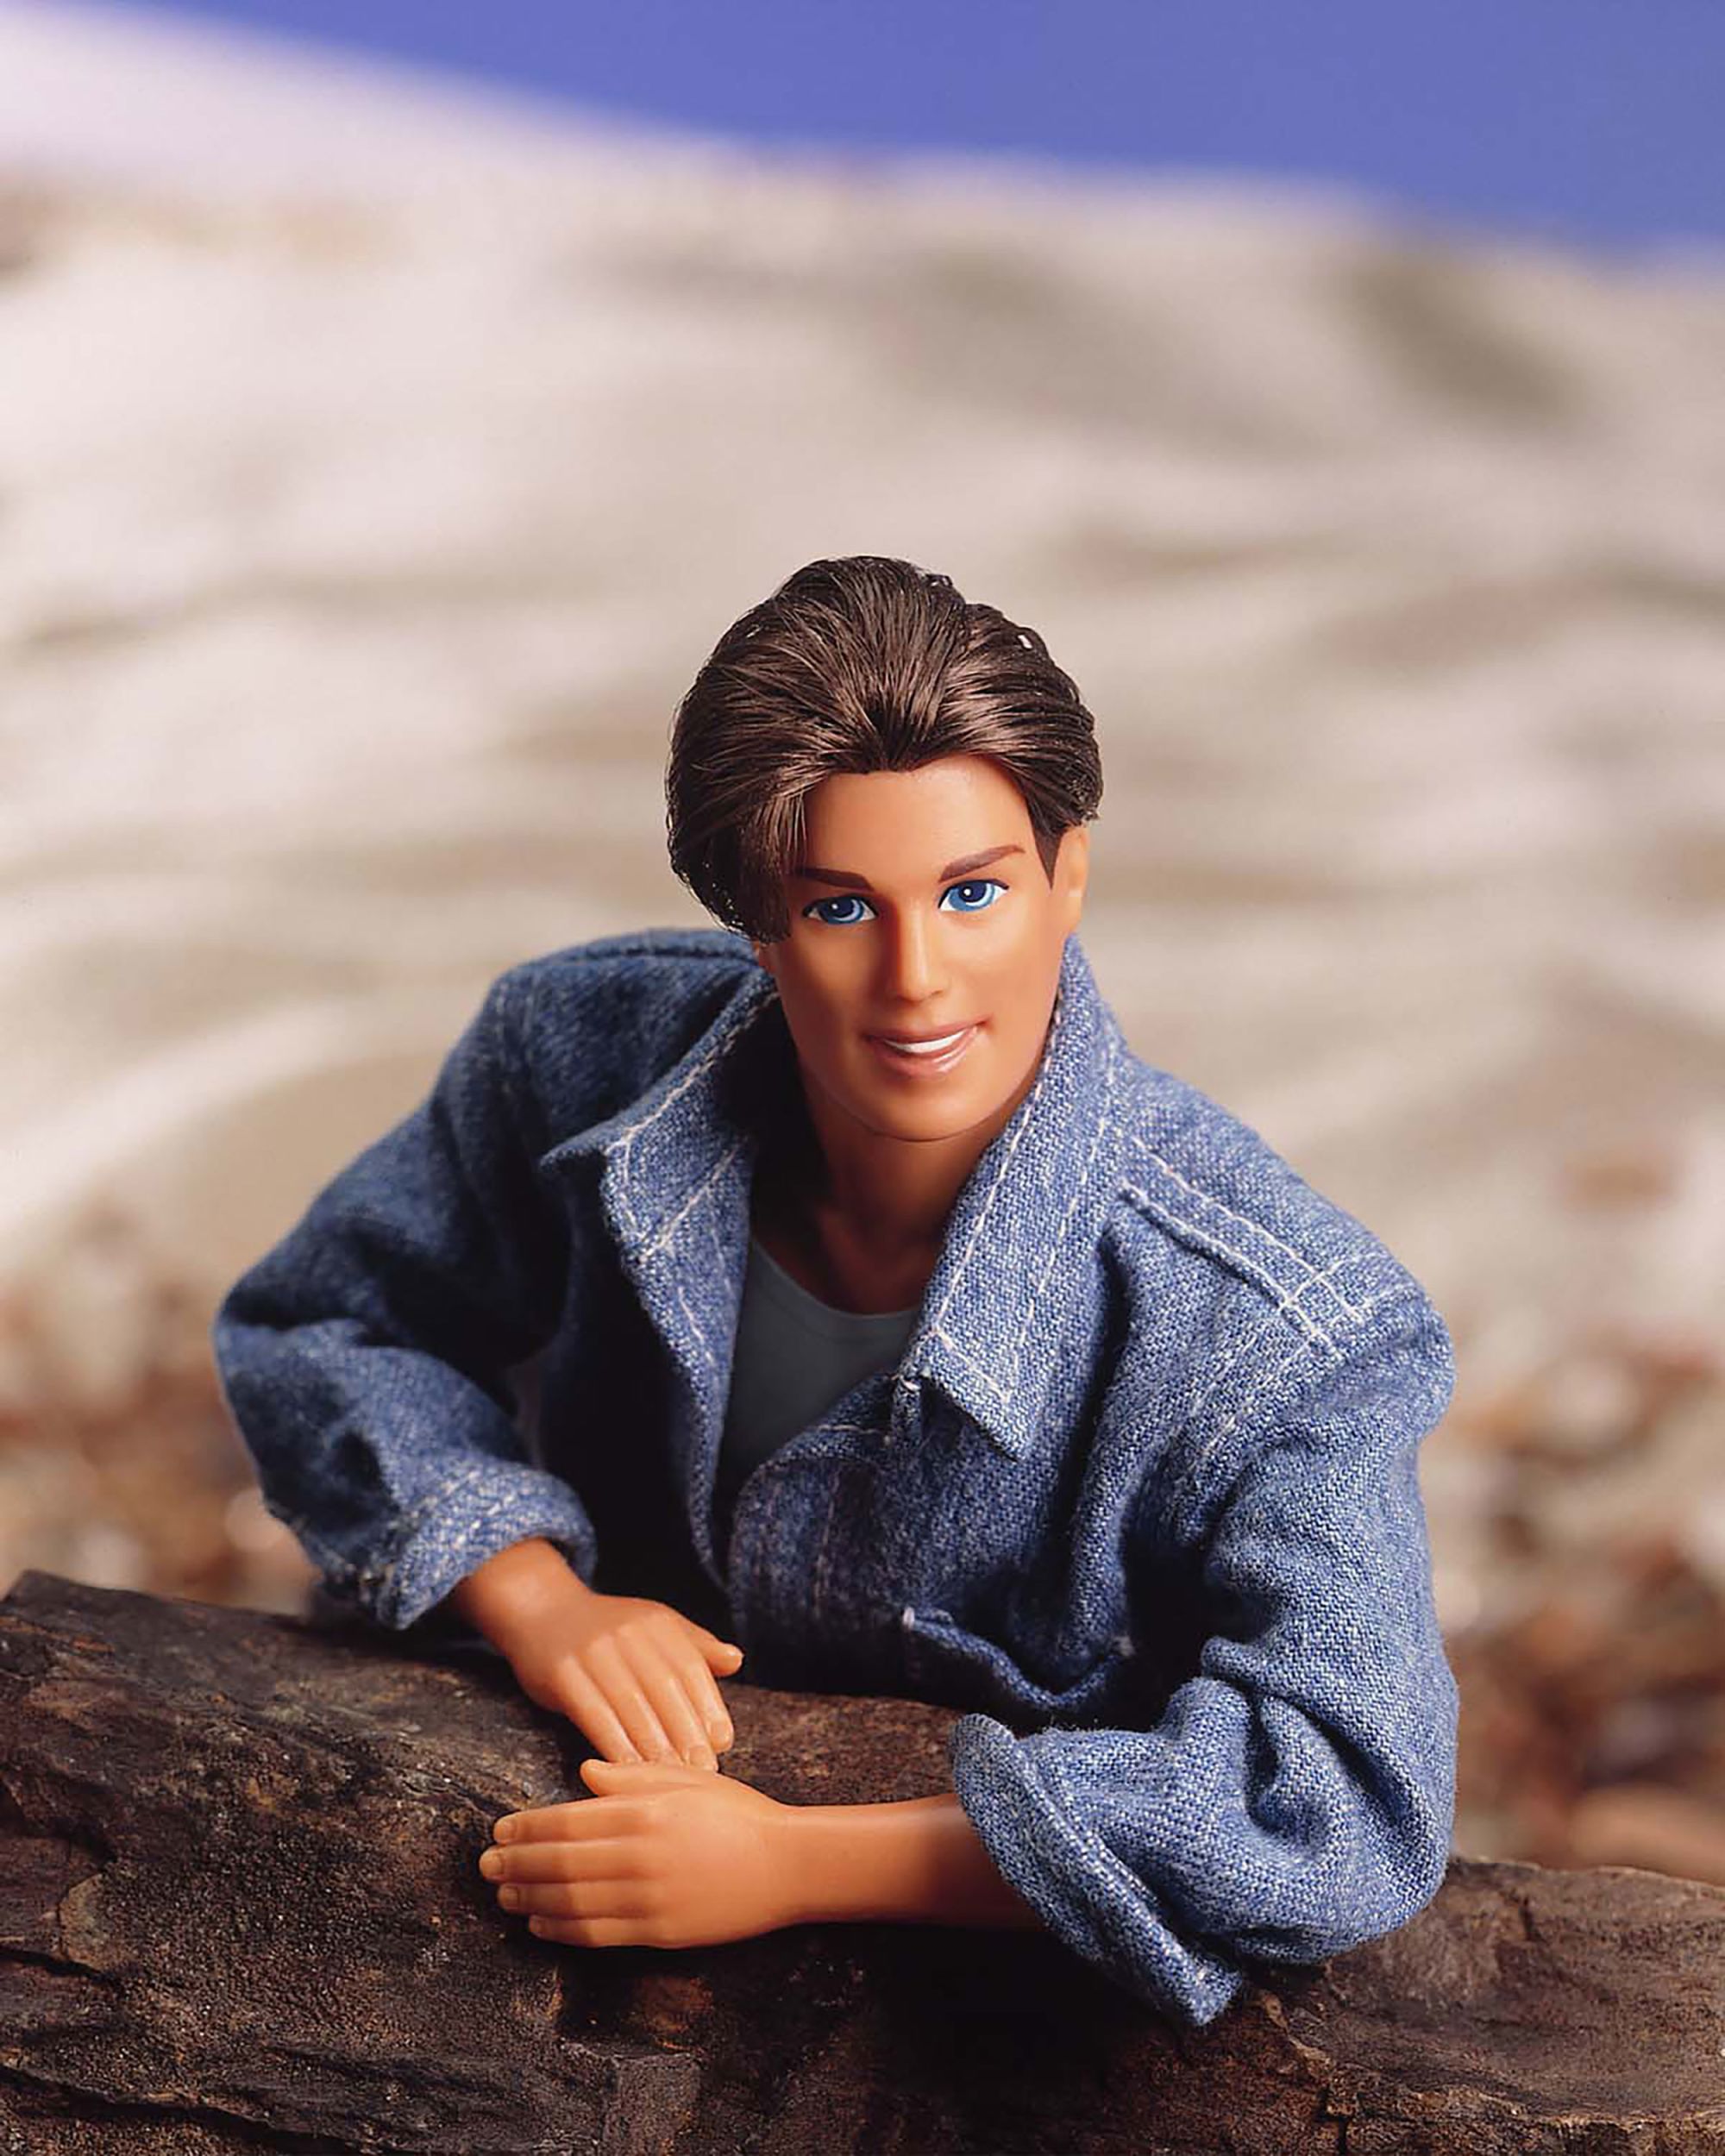 386688 04: (FILE PHOTO) A 1995 Ken doll wears a jean jacket in this portrait. On March 13, 2001, Mattel toy company celebrated the 40th anniversary of the Ken doll which was originally introduced March 13, 1961 at the American International Toy Fair. Originating with his crew cut look and evolving through the funky disco styles of the ''70s and ''80s, to the trendy styles of the ''90s, Ken has been a worldwide pop culture favorite for every era and for several generations. (Photo courtesy of Mattel/Newsmakers)